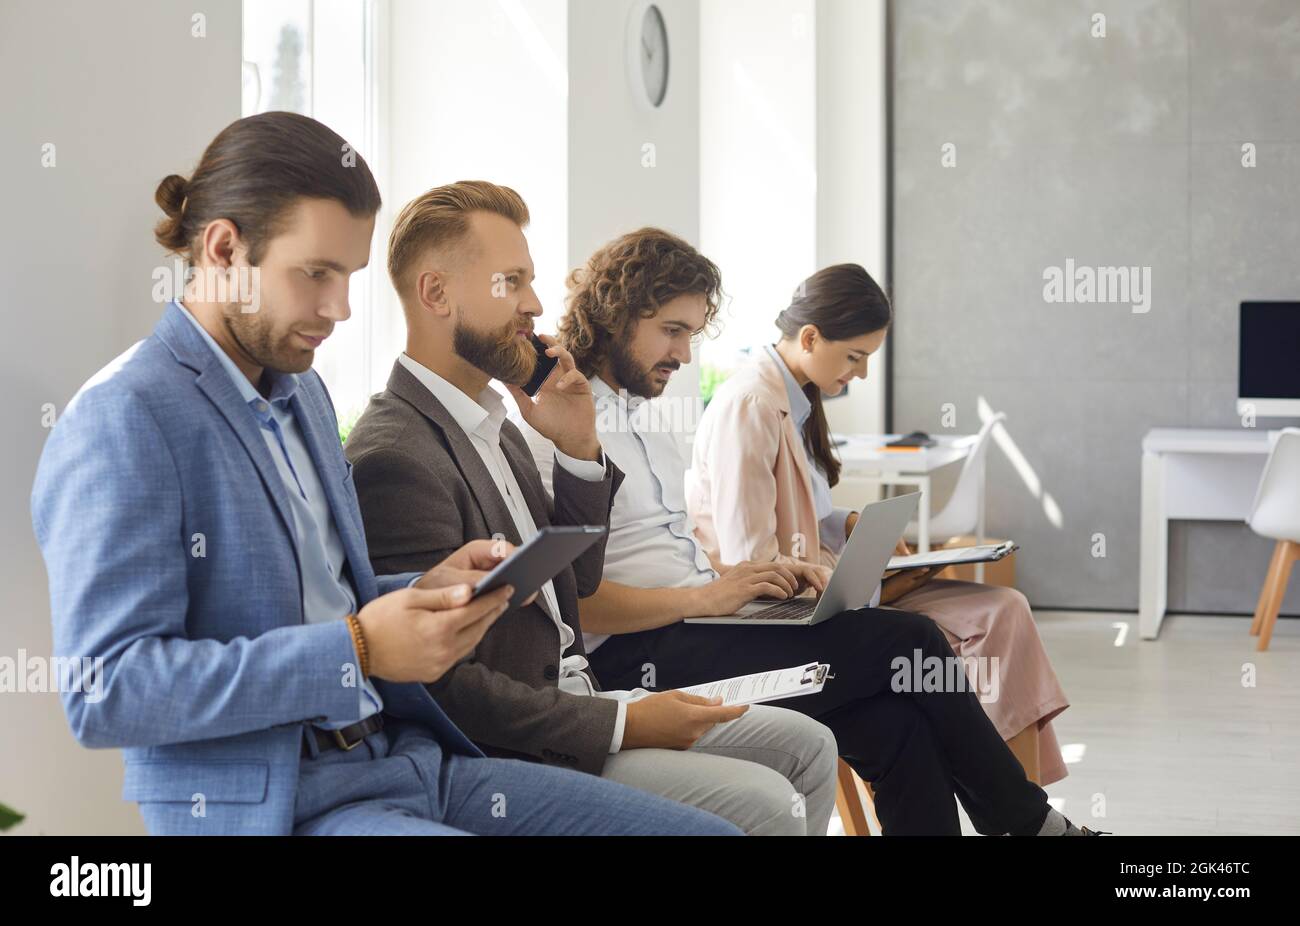 Group of young people waiting in line for a job interview or business appointment Stock Photo